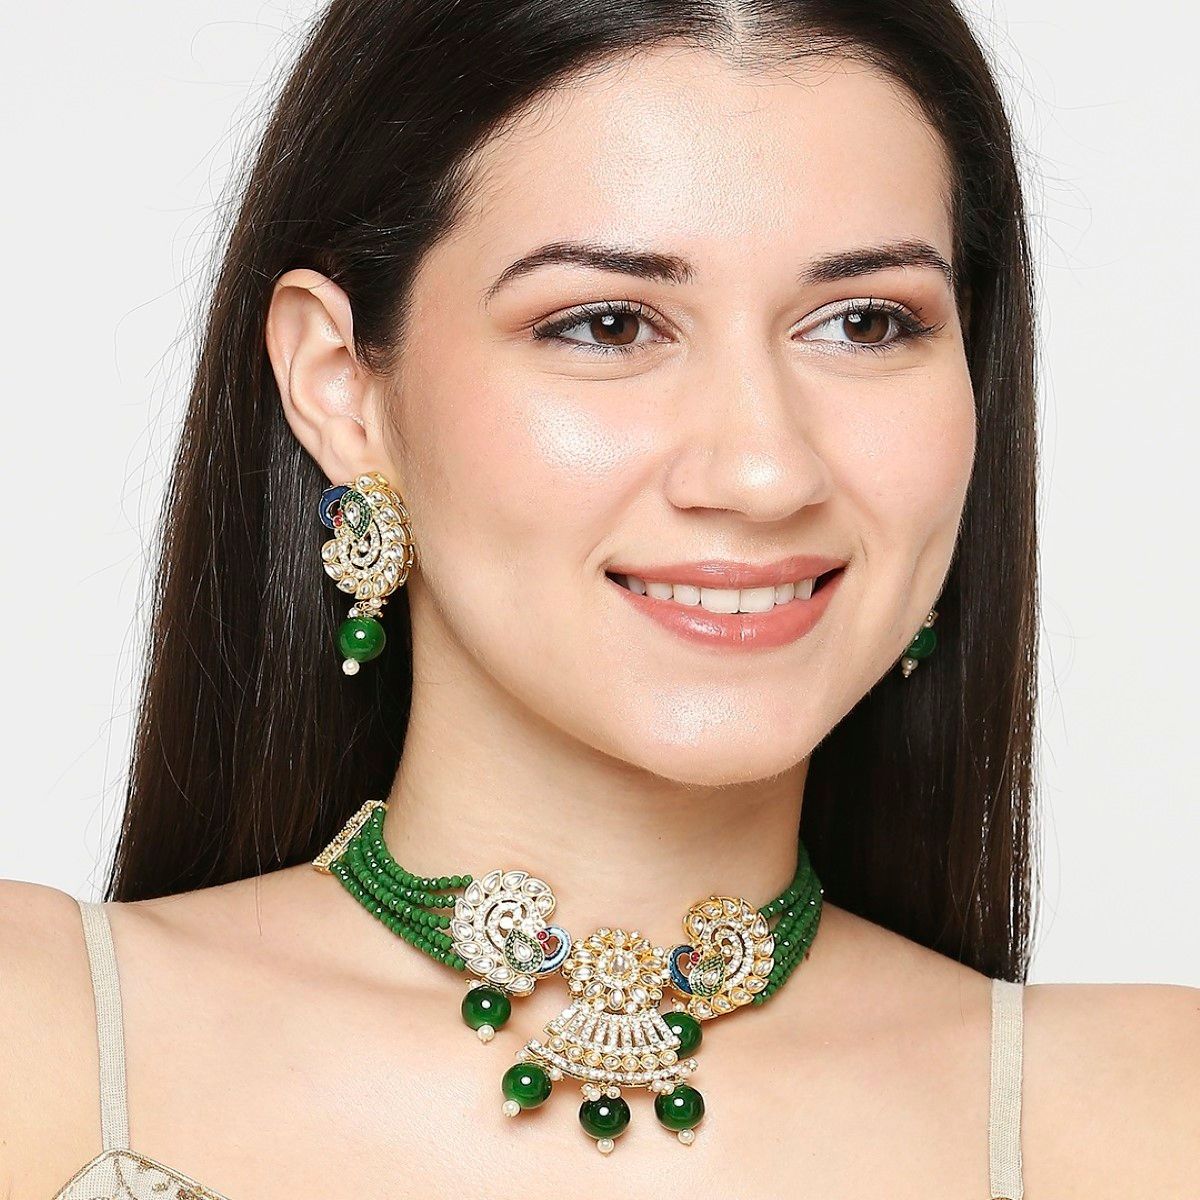 OOMPH Green Beads & Kundan Choker Necklace Set in Peacock Design with Matching Earrings